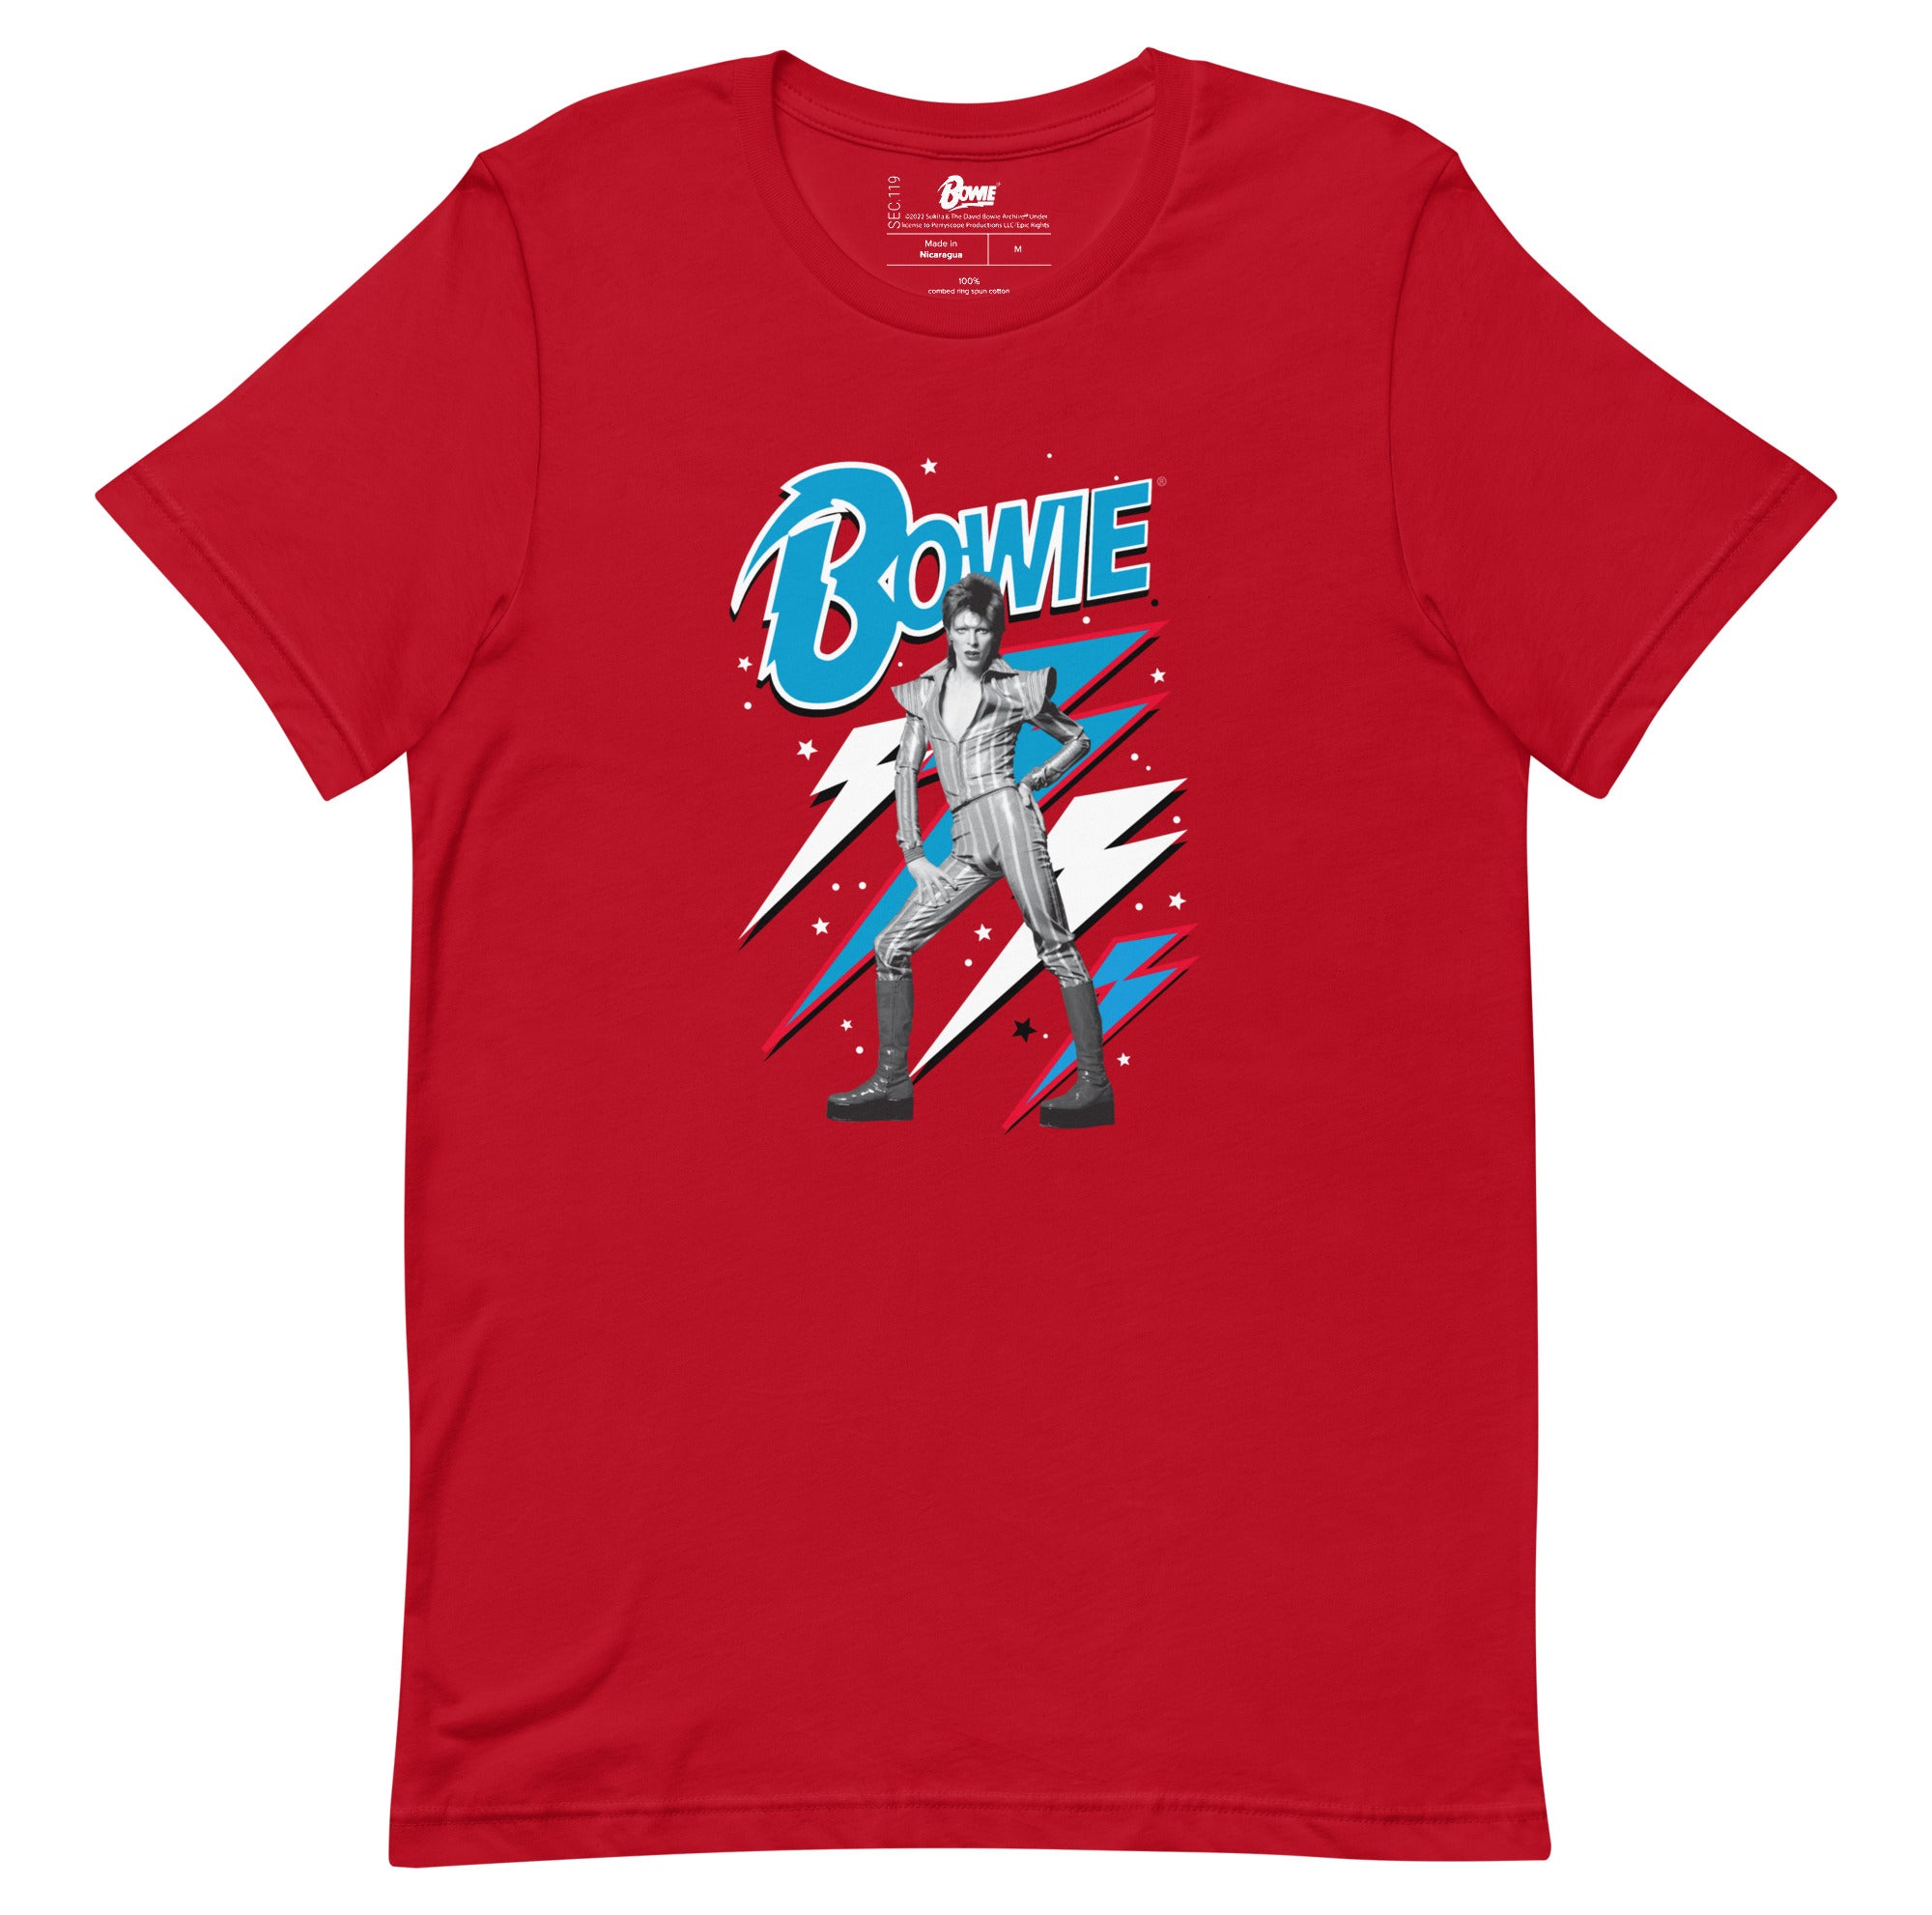 David Bowie Graphic Dance Tee - Section 119